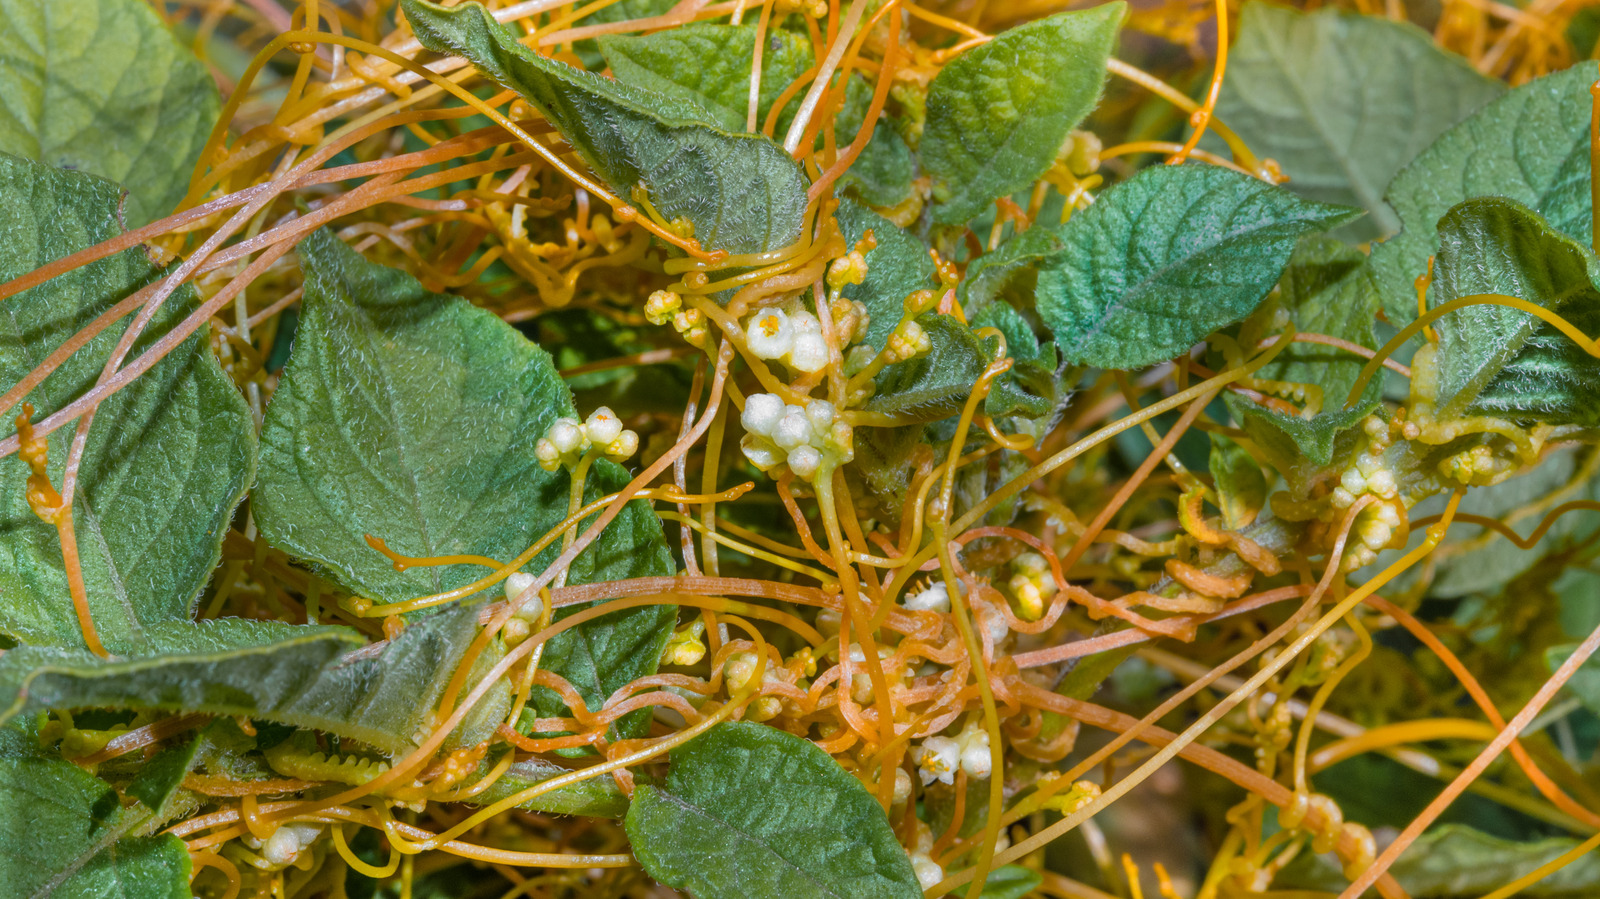 How To Protect Your Yard From Parasitic Dodder Weed